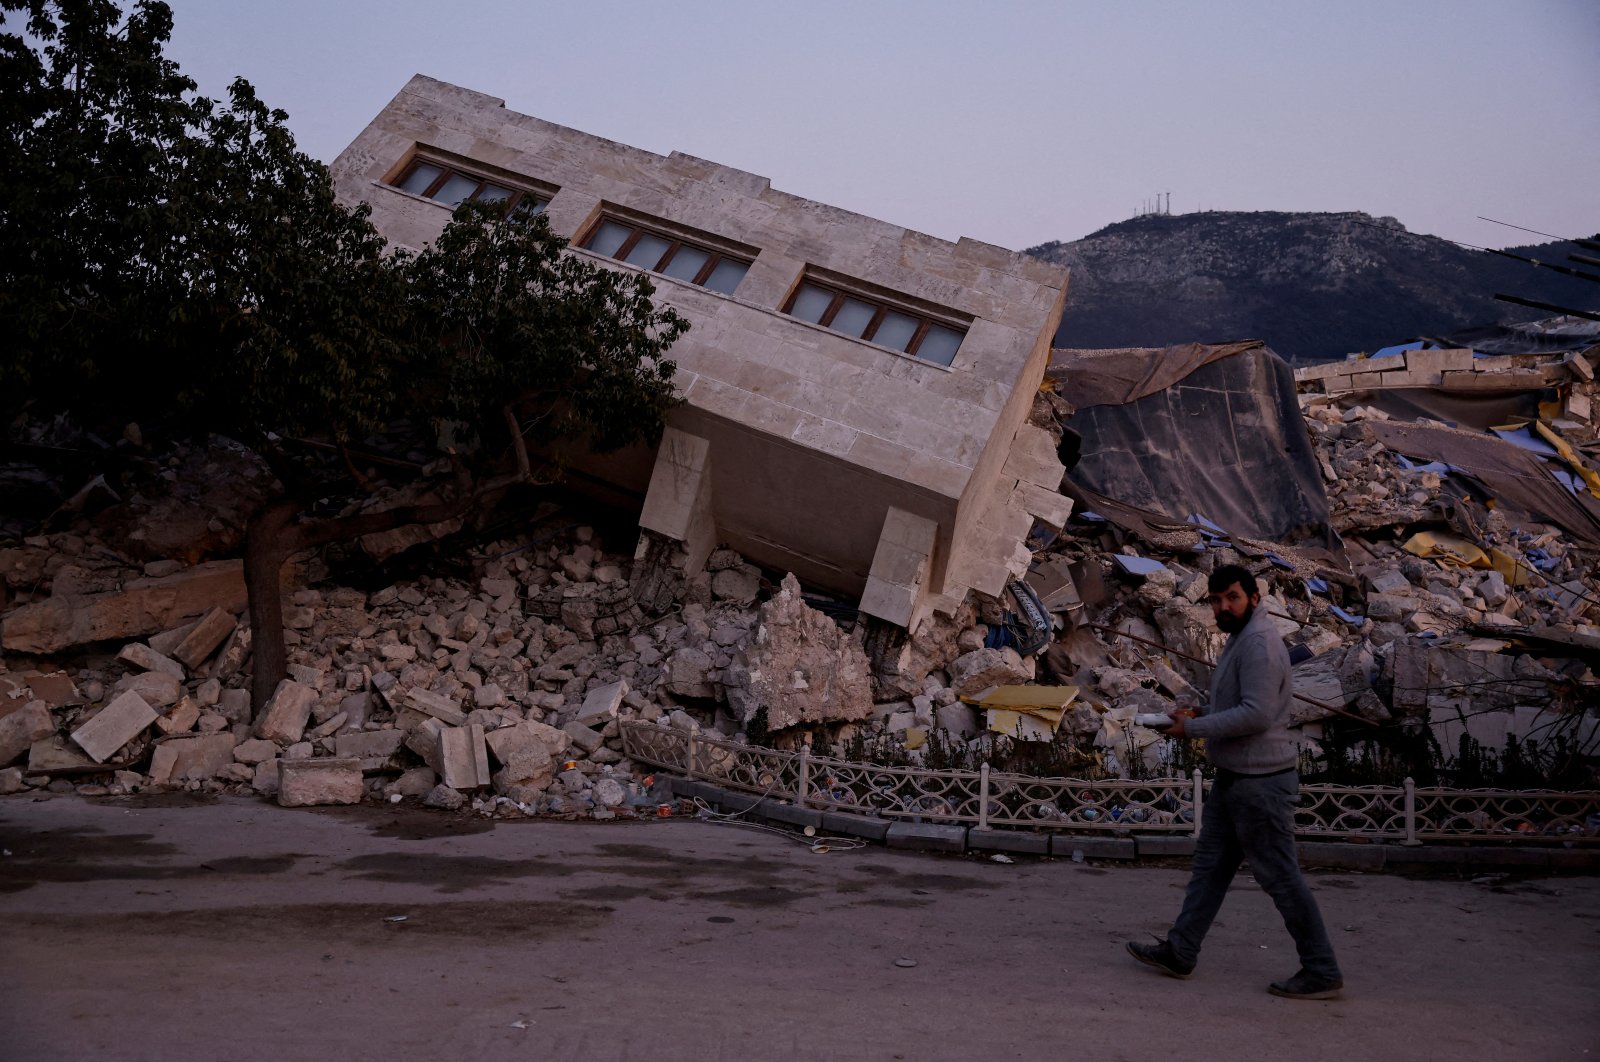 A man walks past a collapsed building and rubble, in the aftermath of a deadly earthquake, in Antakya, Hatay province, southeastern Türkiye, Feb. 21, 2023. (Reuters Photo)